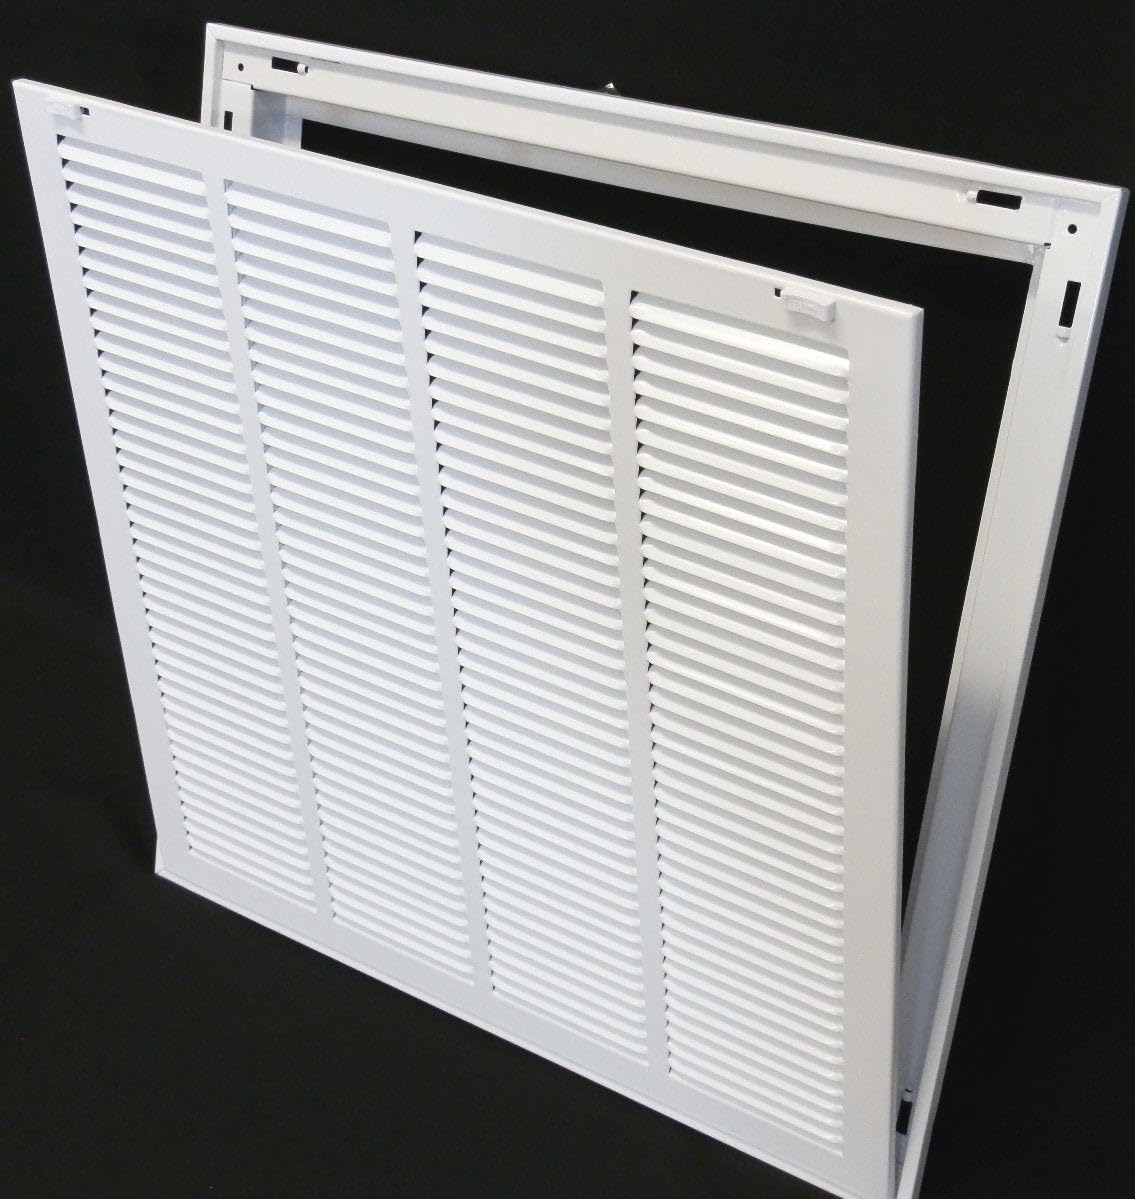 24&quot; X 10&quot; Steel Return Air Filter Grille for 1&quot; Filter - Removable Frame - * Filter Included * [Outer Dimensions: 26 5/8&quot; X 12 5/8&quot;]